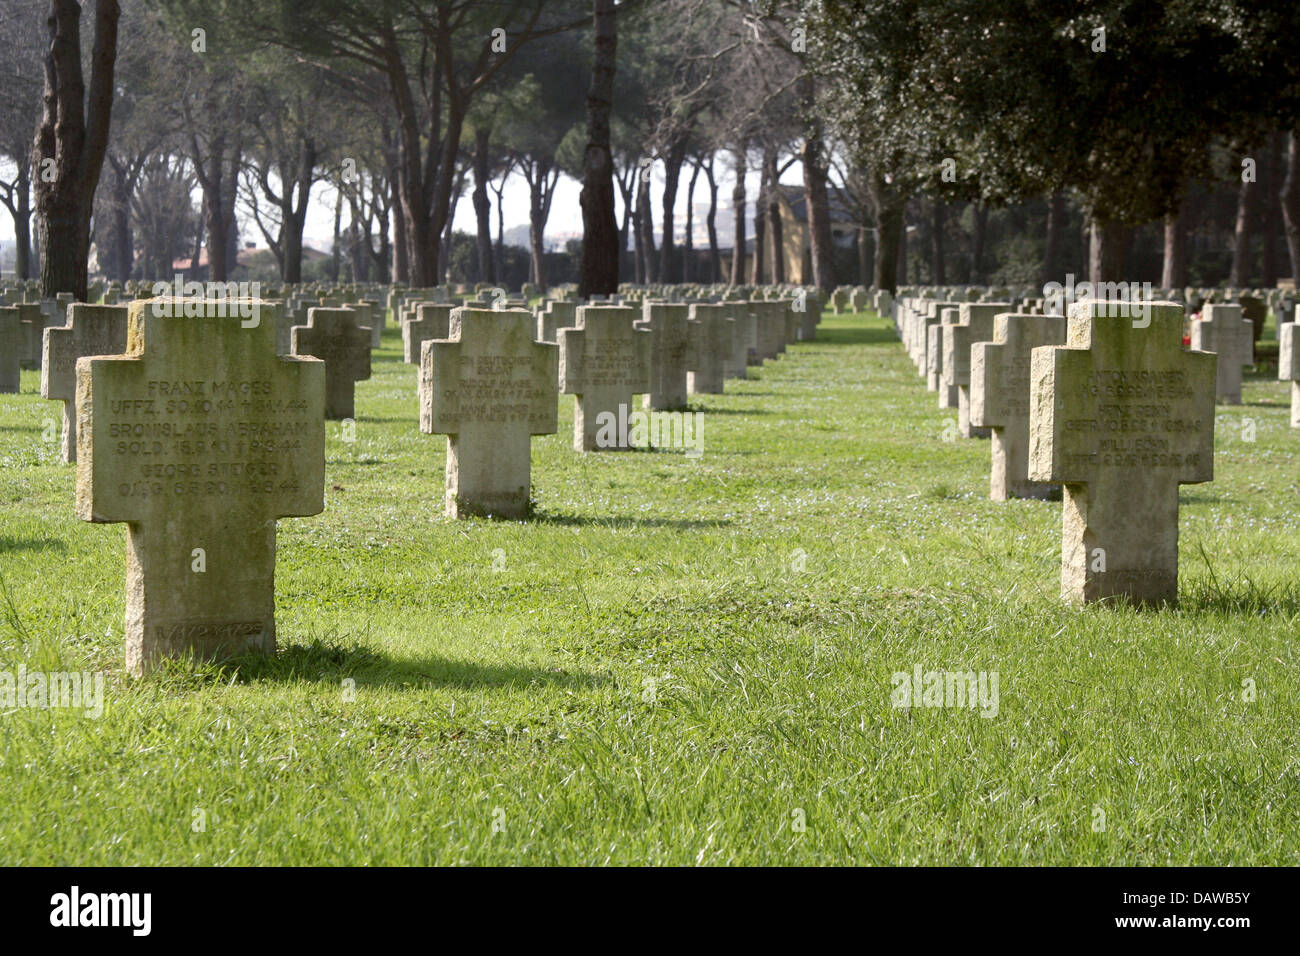 The photo shows grave stones at the military cemetary for German soldiers killed in WWII in Pomezia, Italy, 17 March 2007. 27.423 German soldiers killed in World War II are buried here. Photo: Lars Halbauer Stock Photo